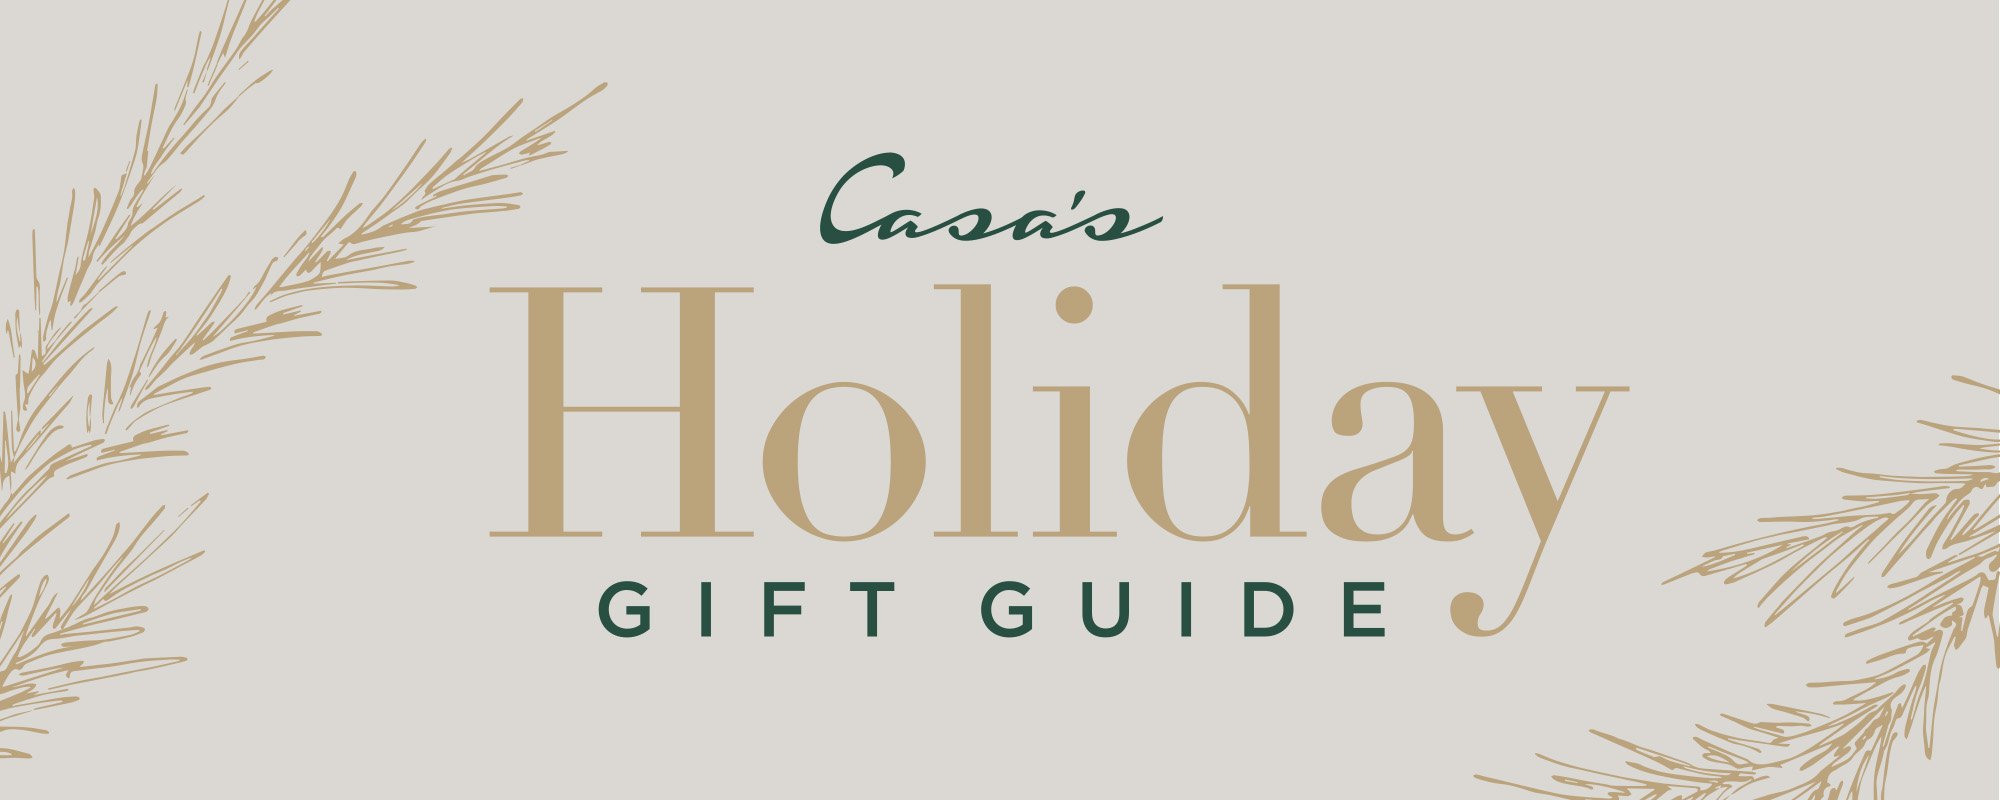 Holiday gift guide banner